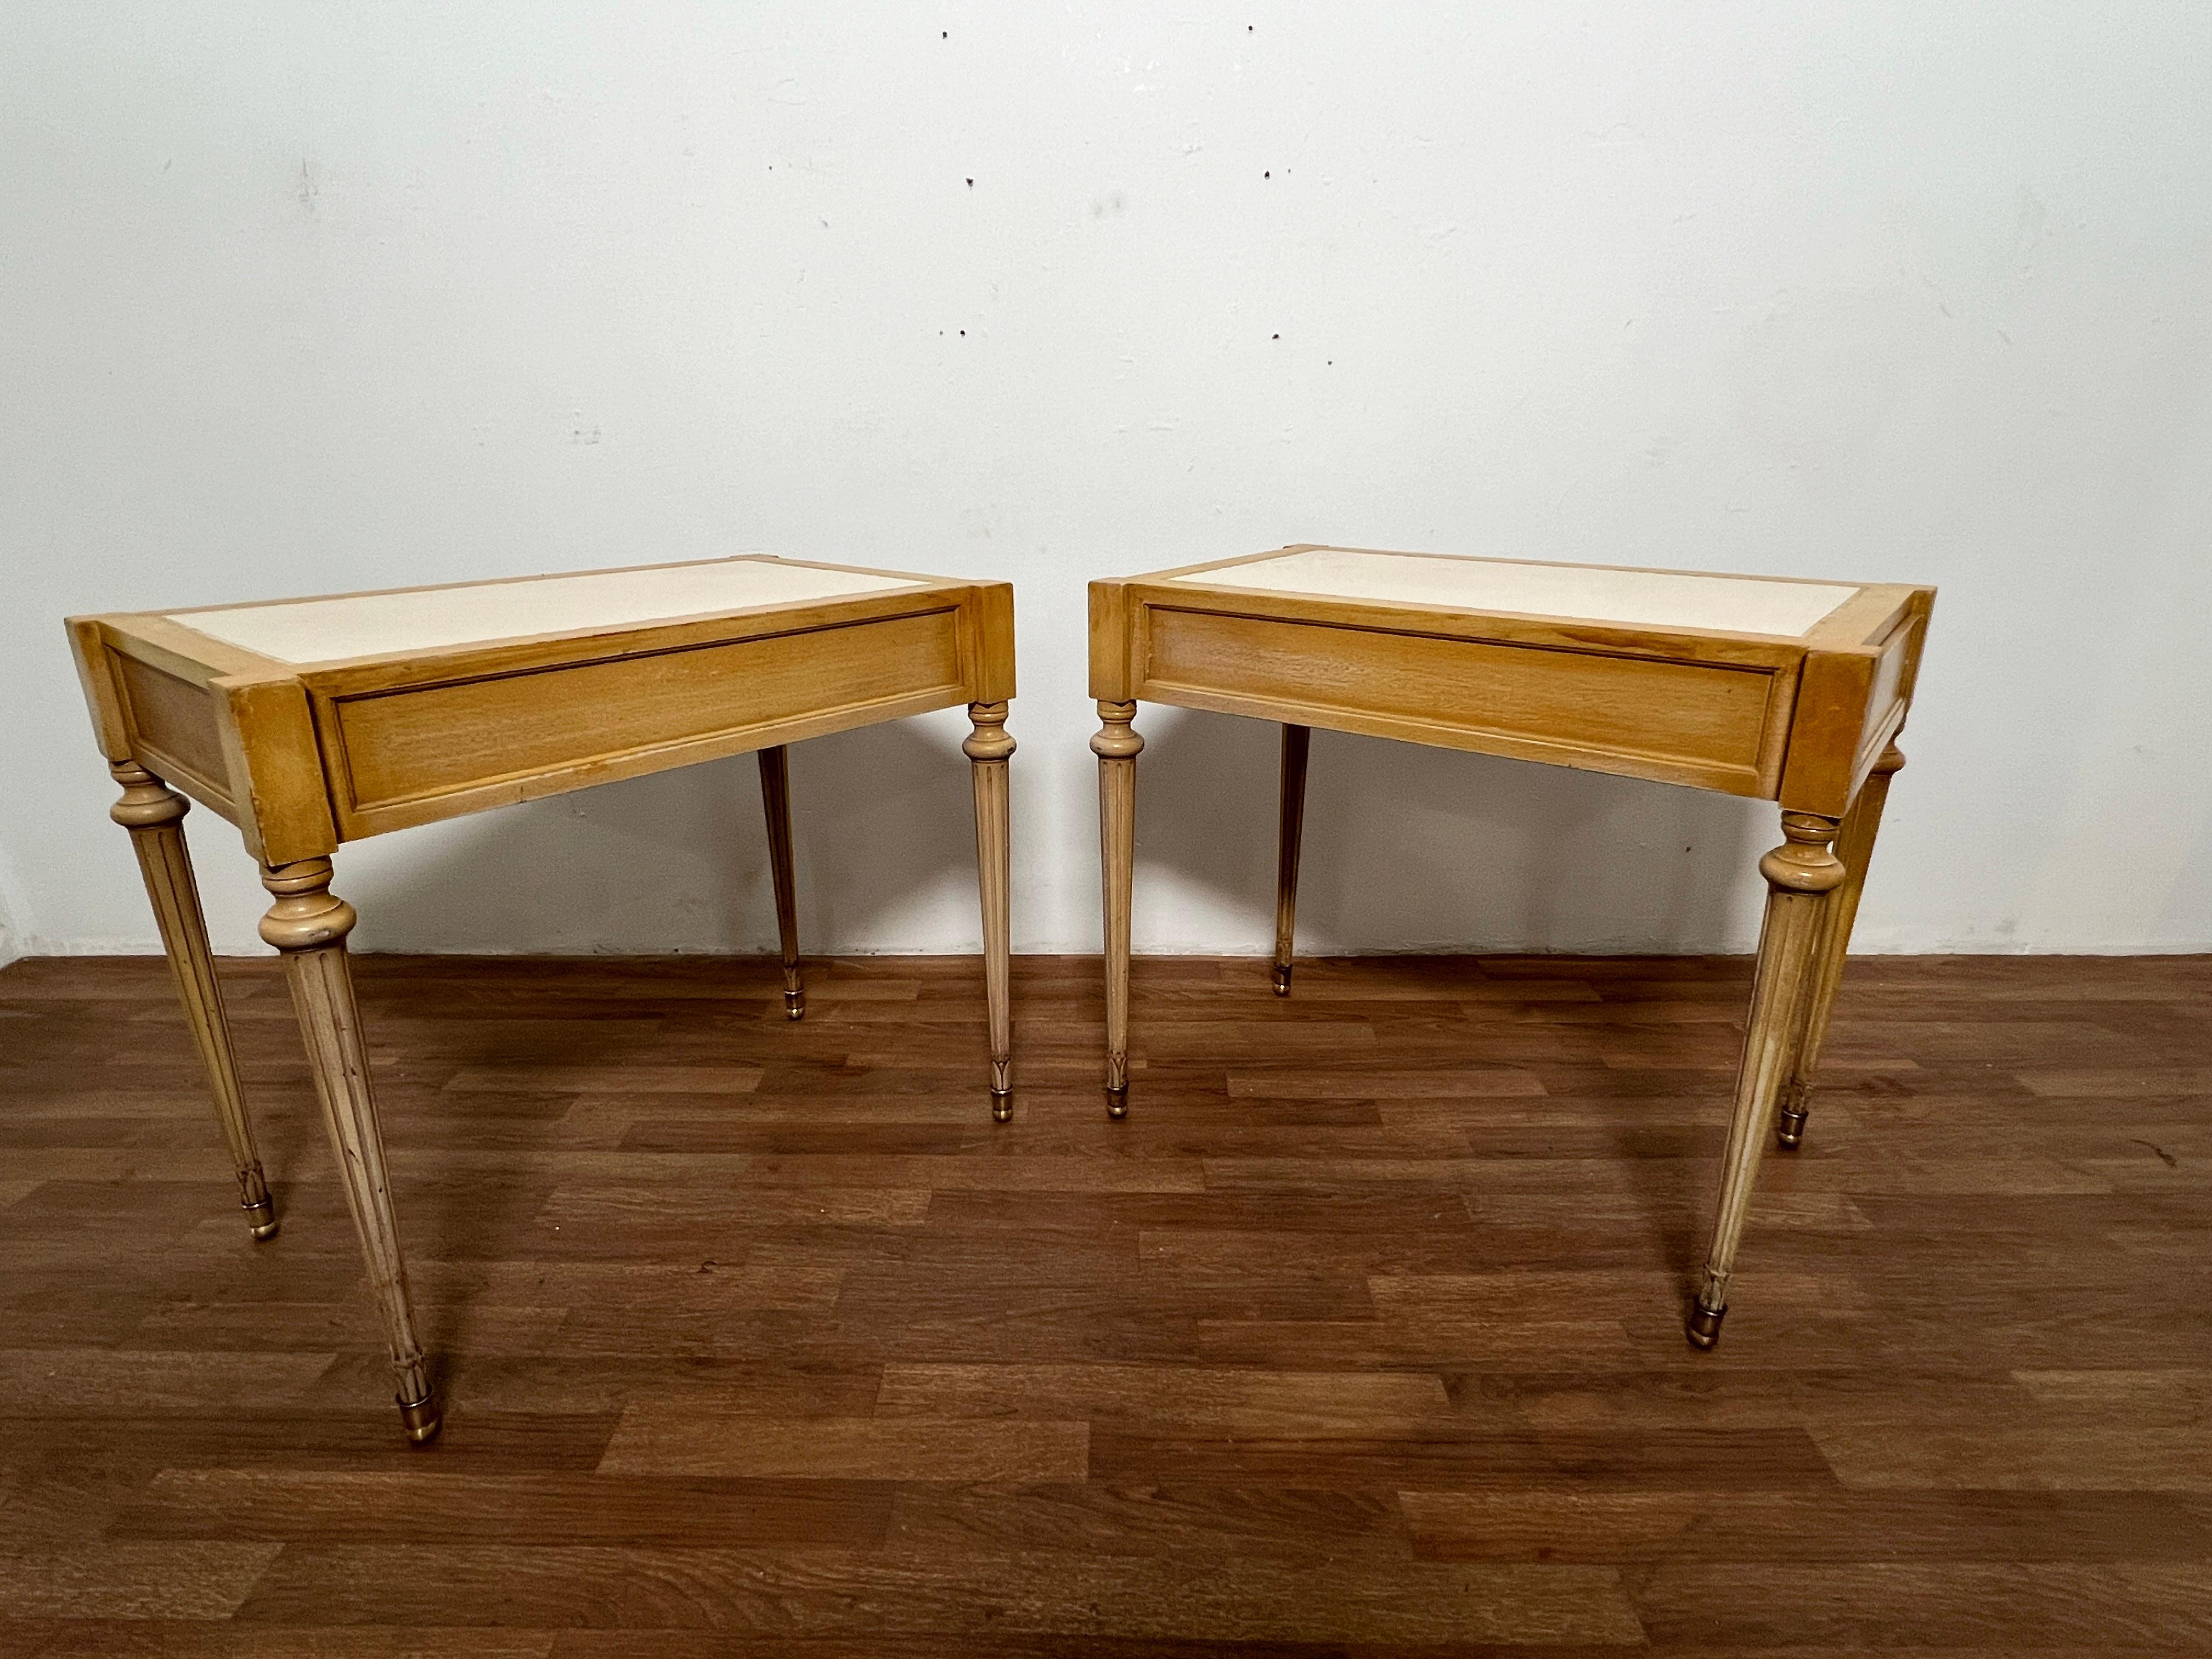 Pair of Louis XVI Style Side Tables With Leather Tops by F & G Furniture, 1950s For Sale 8